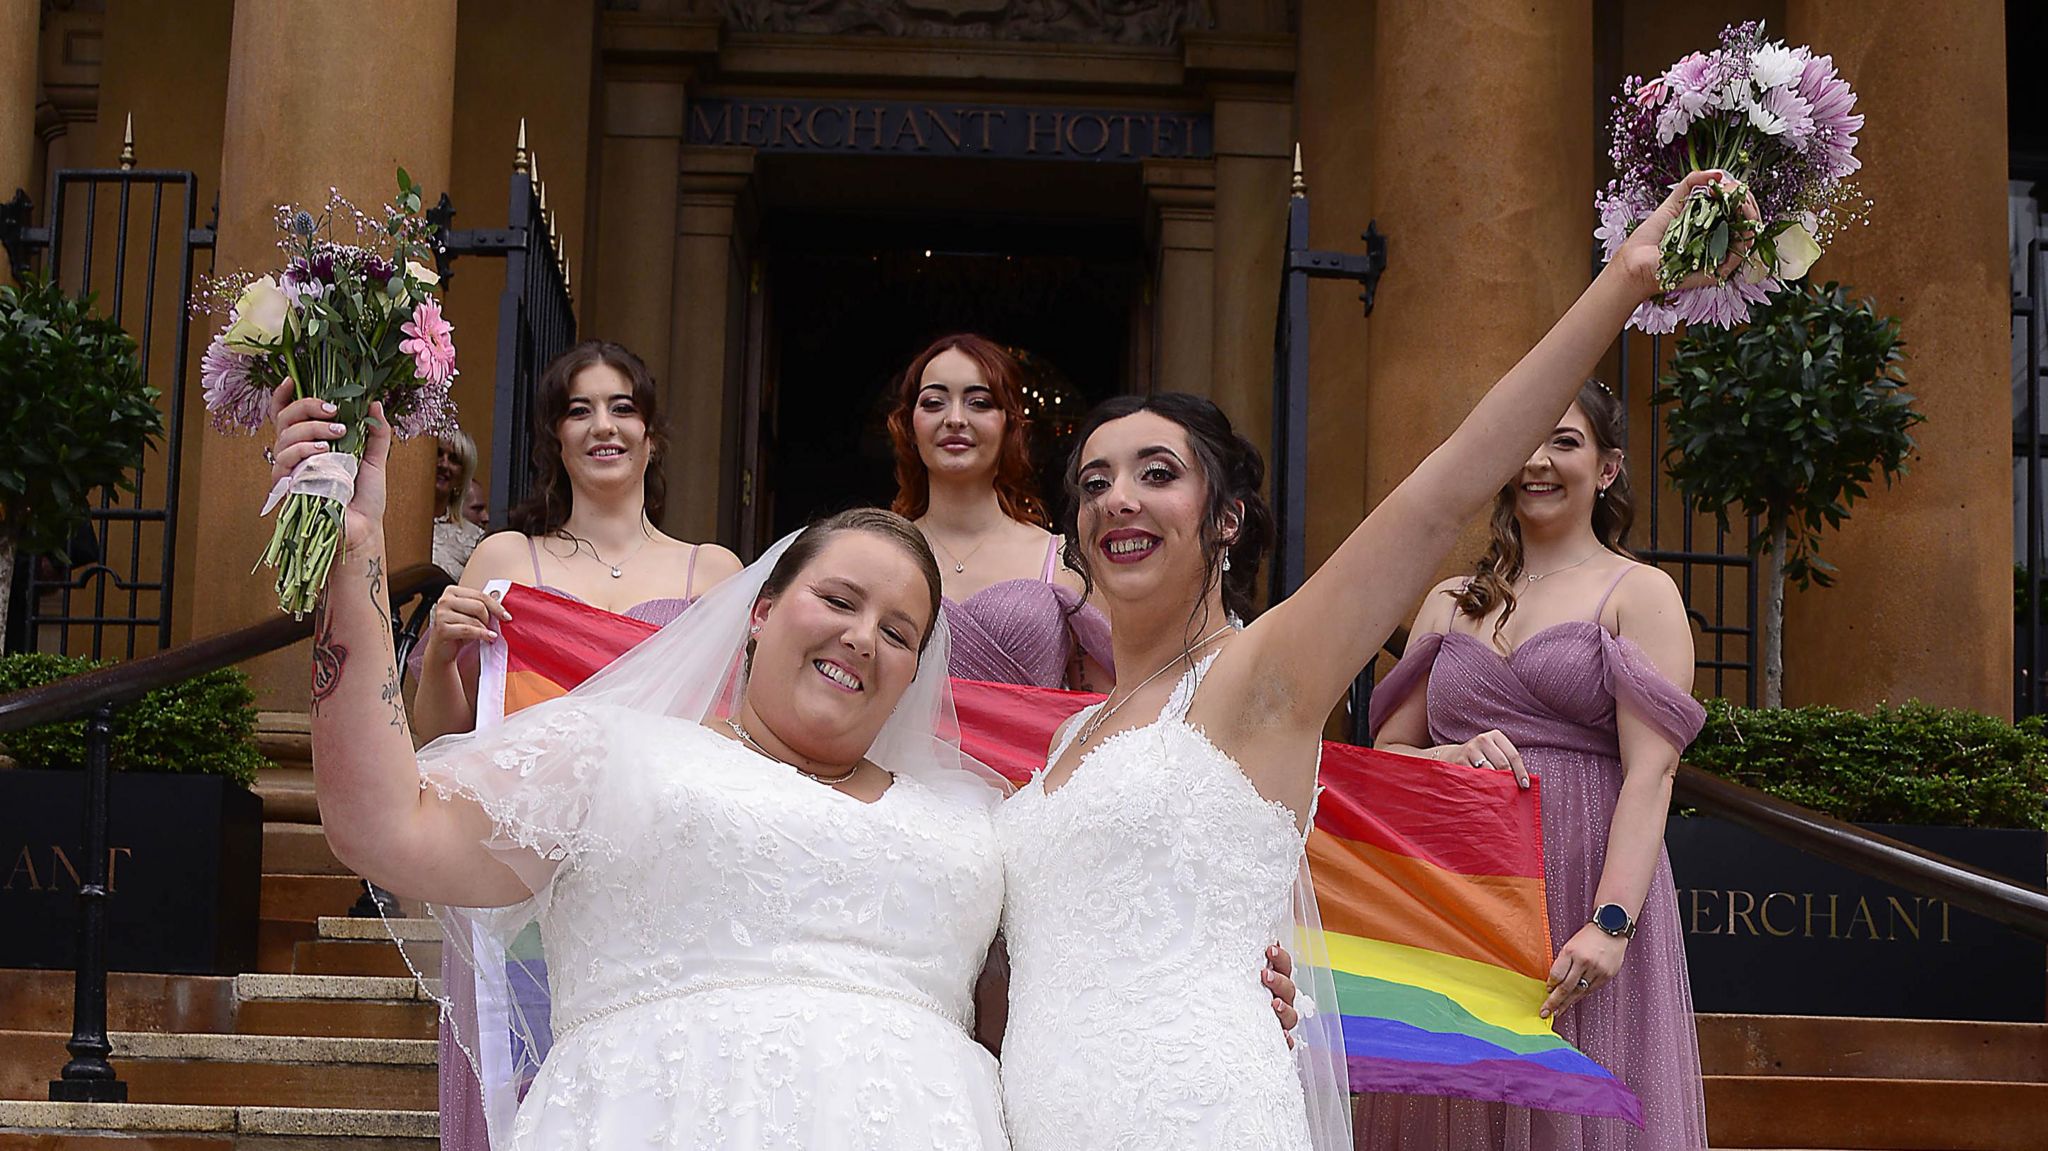  Carrie- Anne Ives and Hannah Ives from Banbridge pictured during their Wedding at the The Merchant Hotel in Belfast on Pride Day.